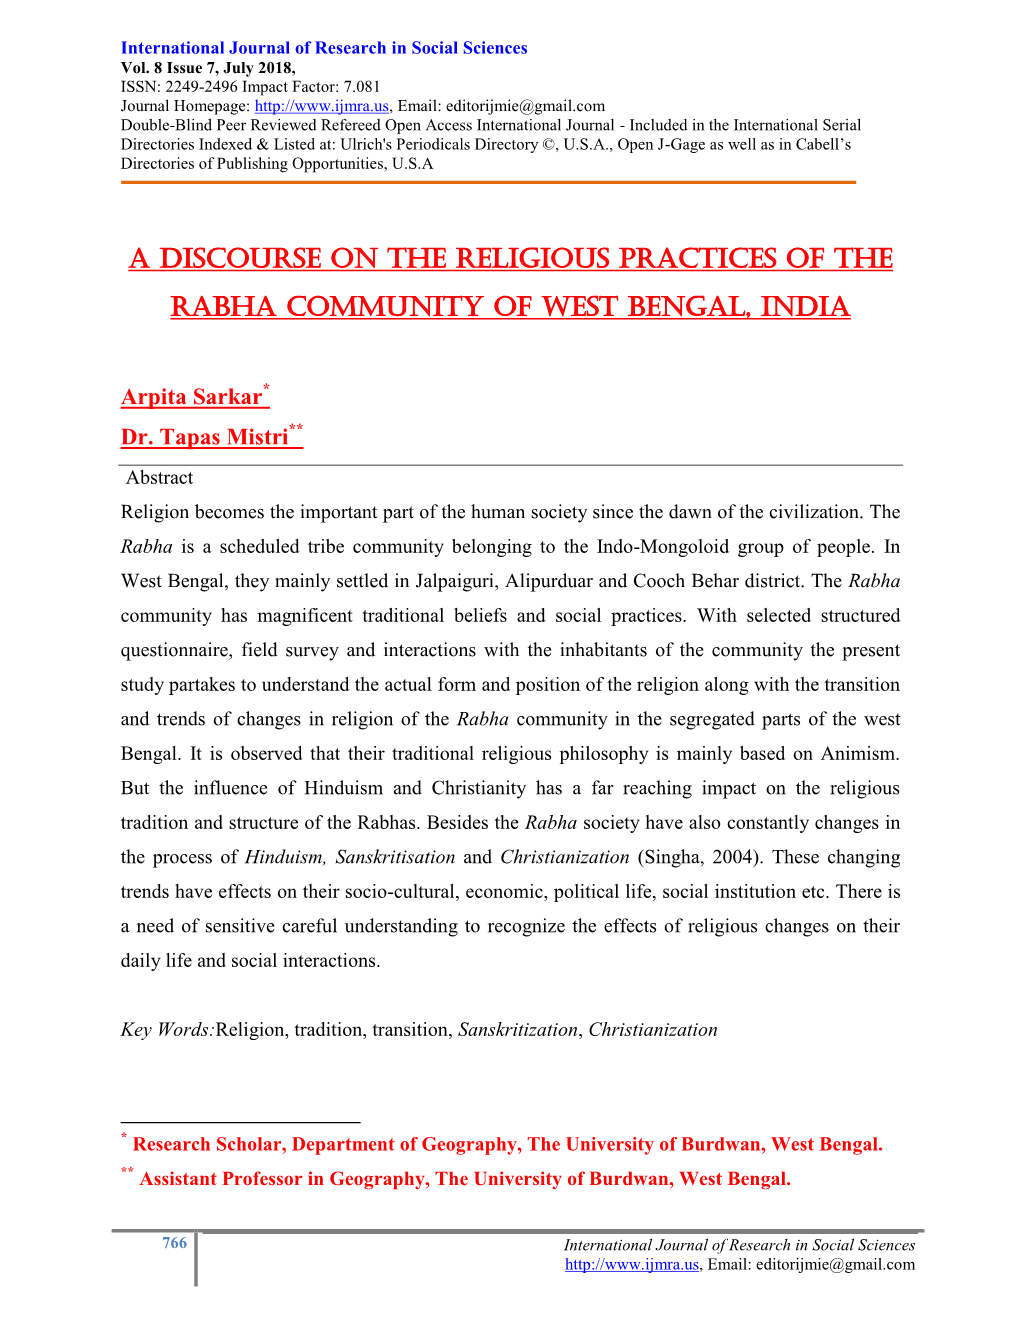 A Discourse on the Religious Practices of the Rabha Community of West Bengal, India